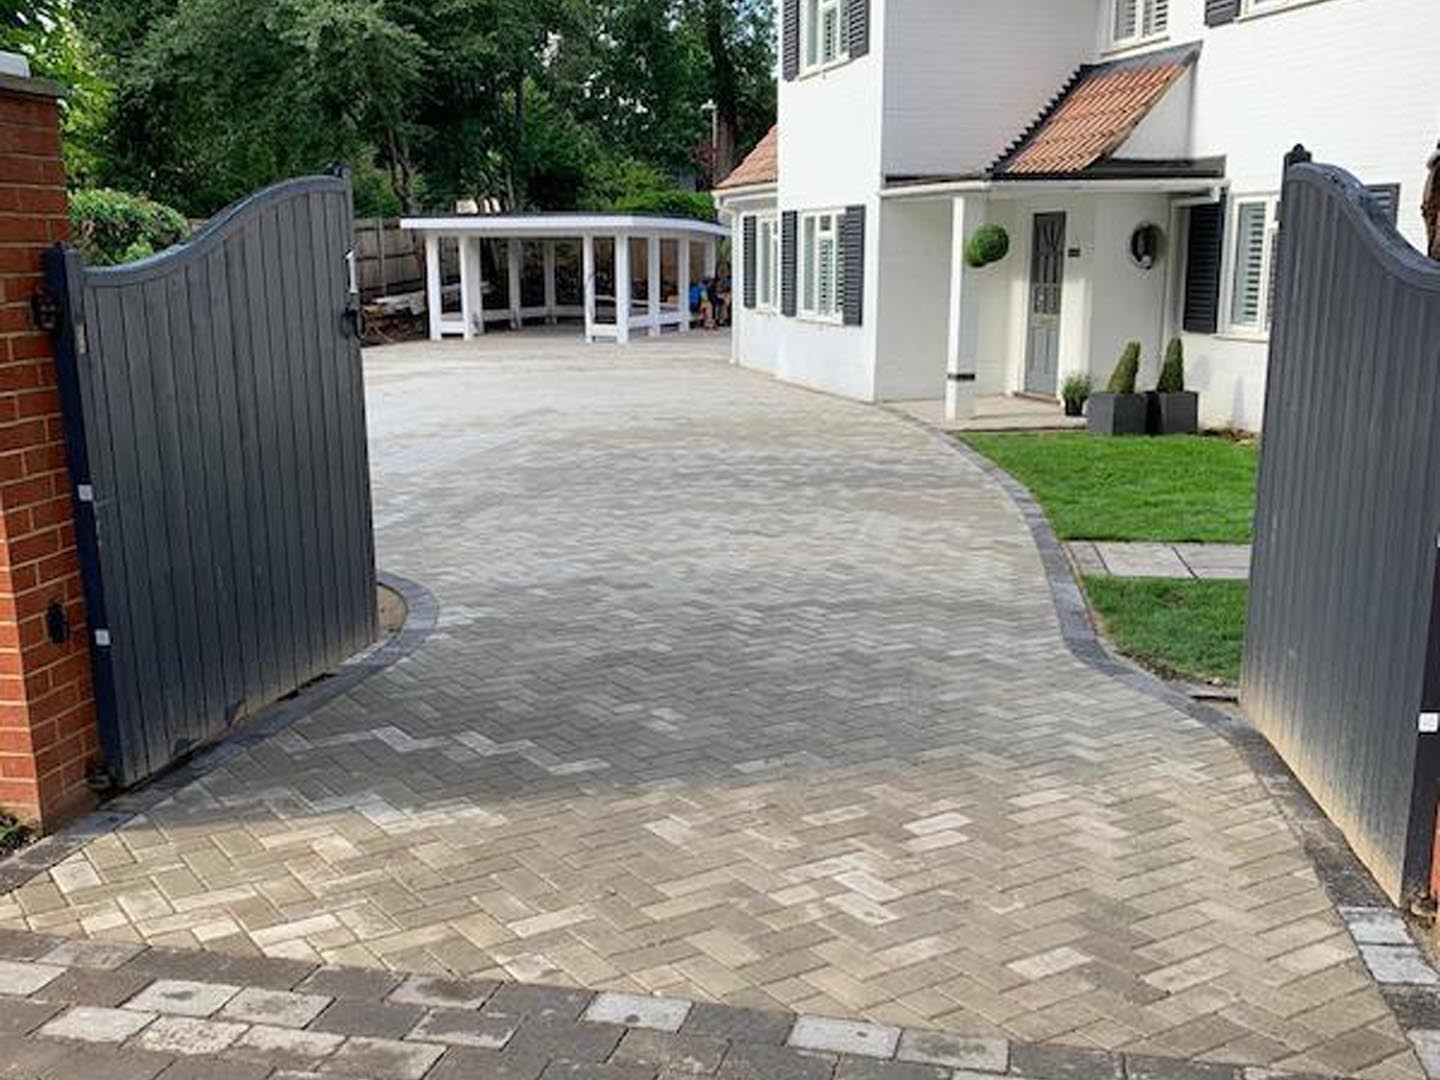 Cambs Paving - Block Paving Driveway specialists in Cambridge